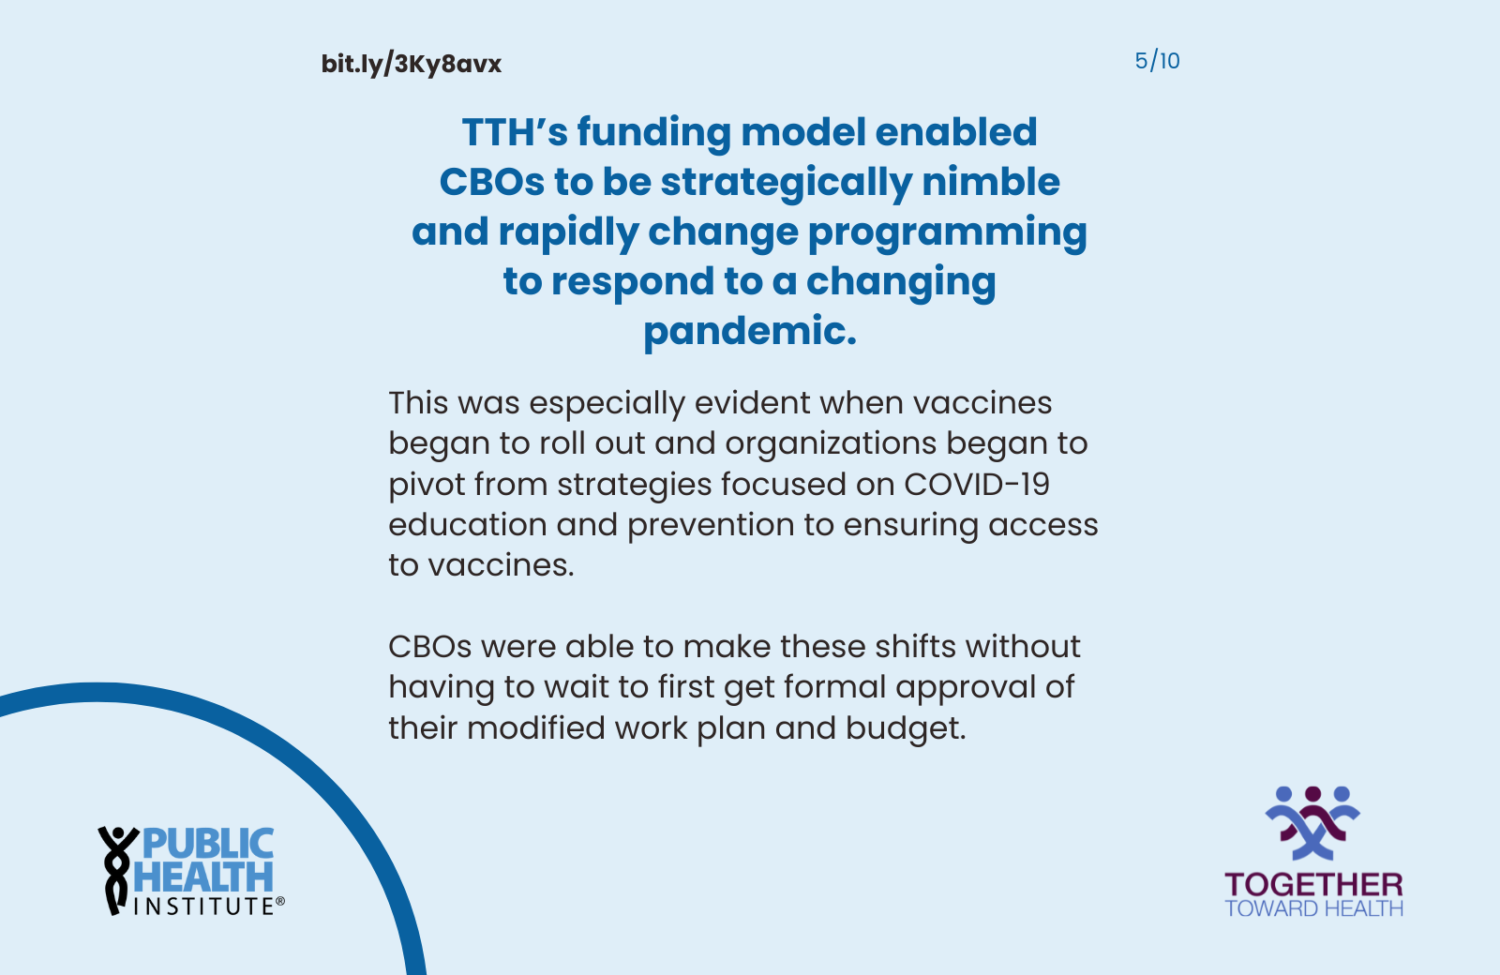 TTH’s funding model enabled CBOs to be strategically nimble and rapidly change programming to respond to a changing pandemic.